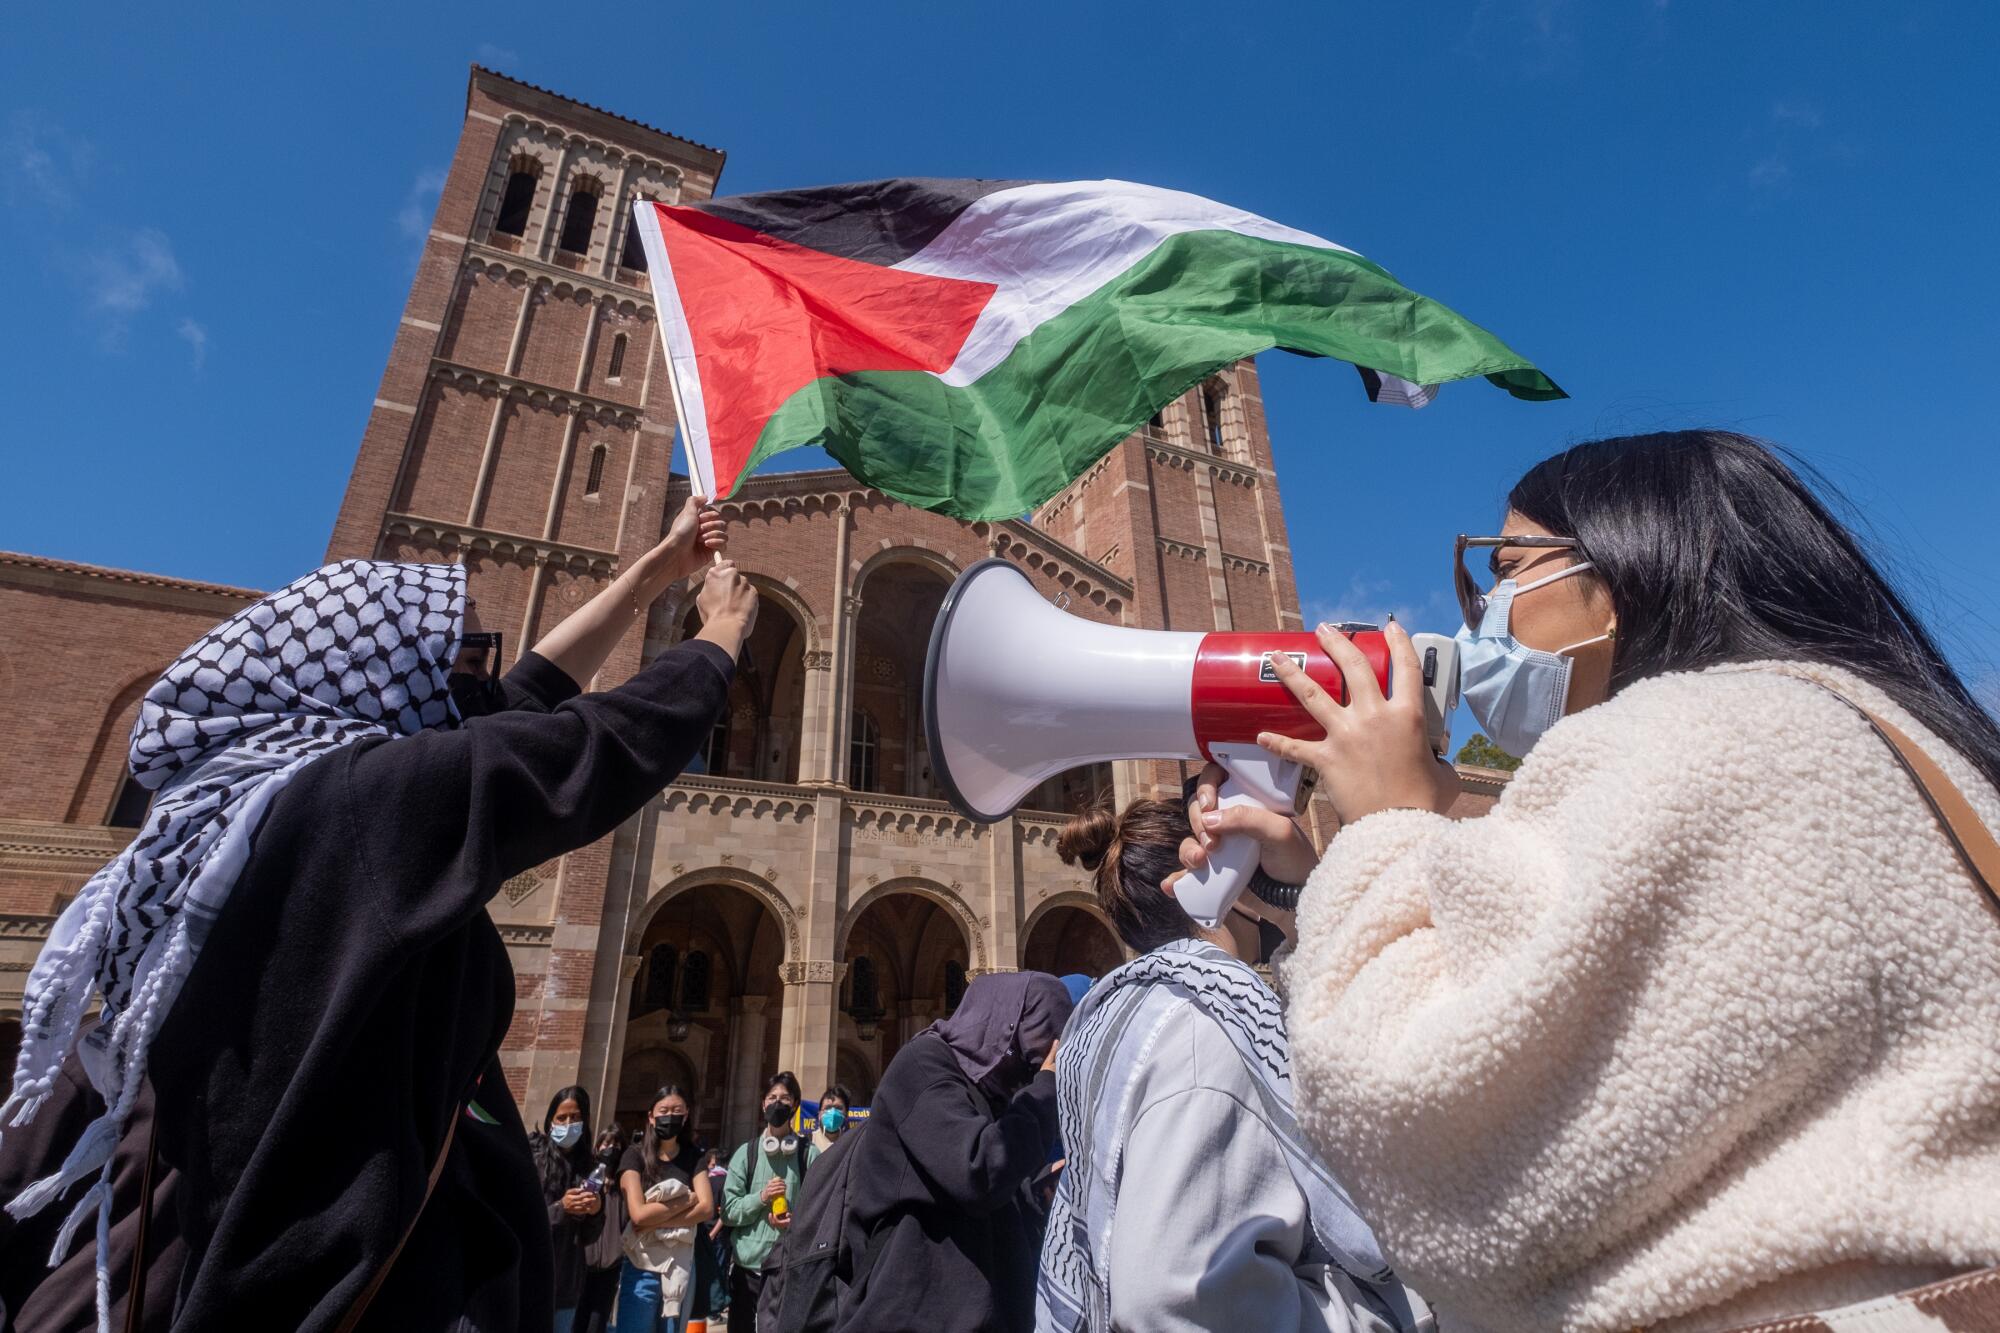 Pro-Palestine protesters gather at an encampment on the campus of UCLA 